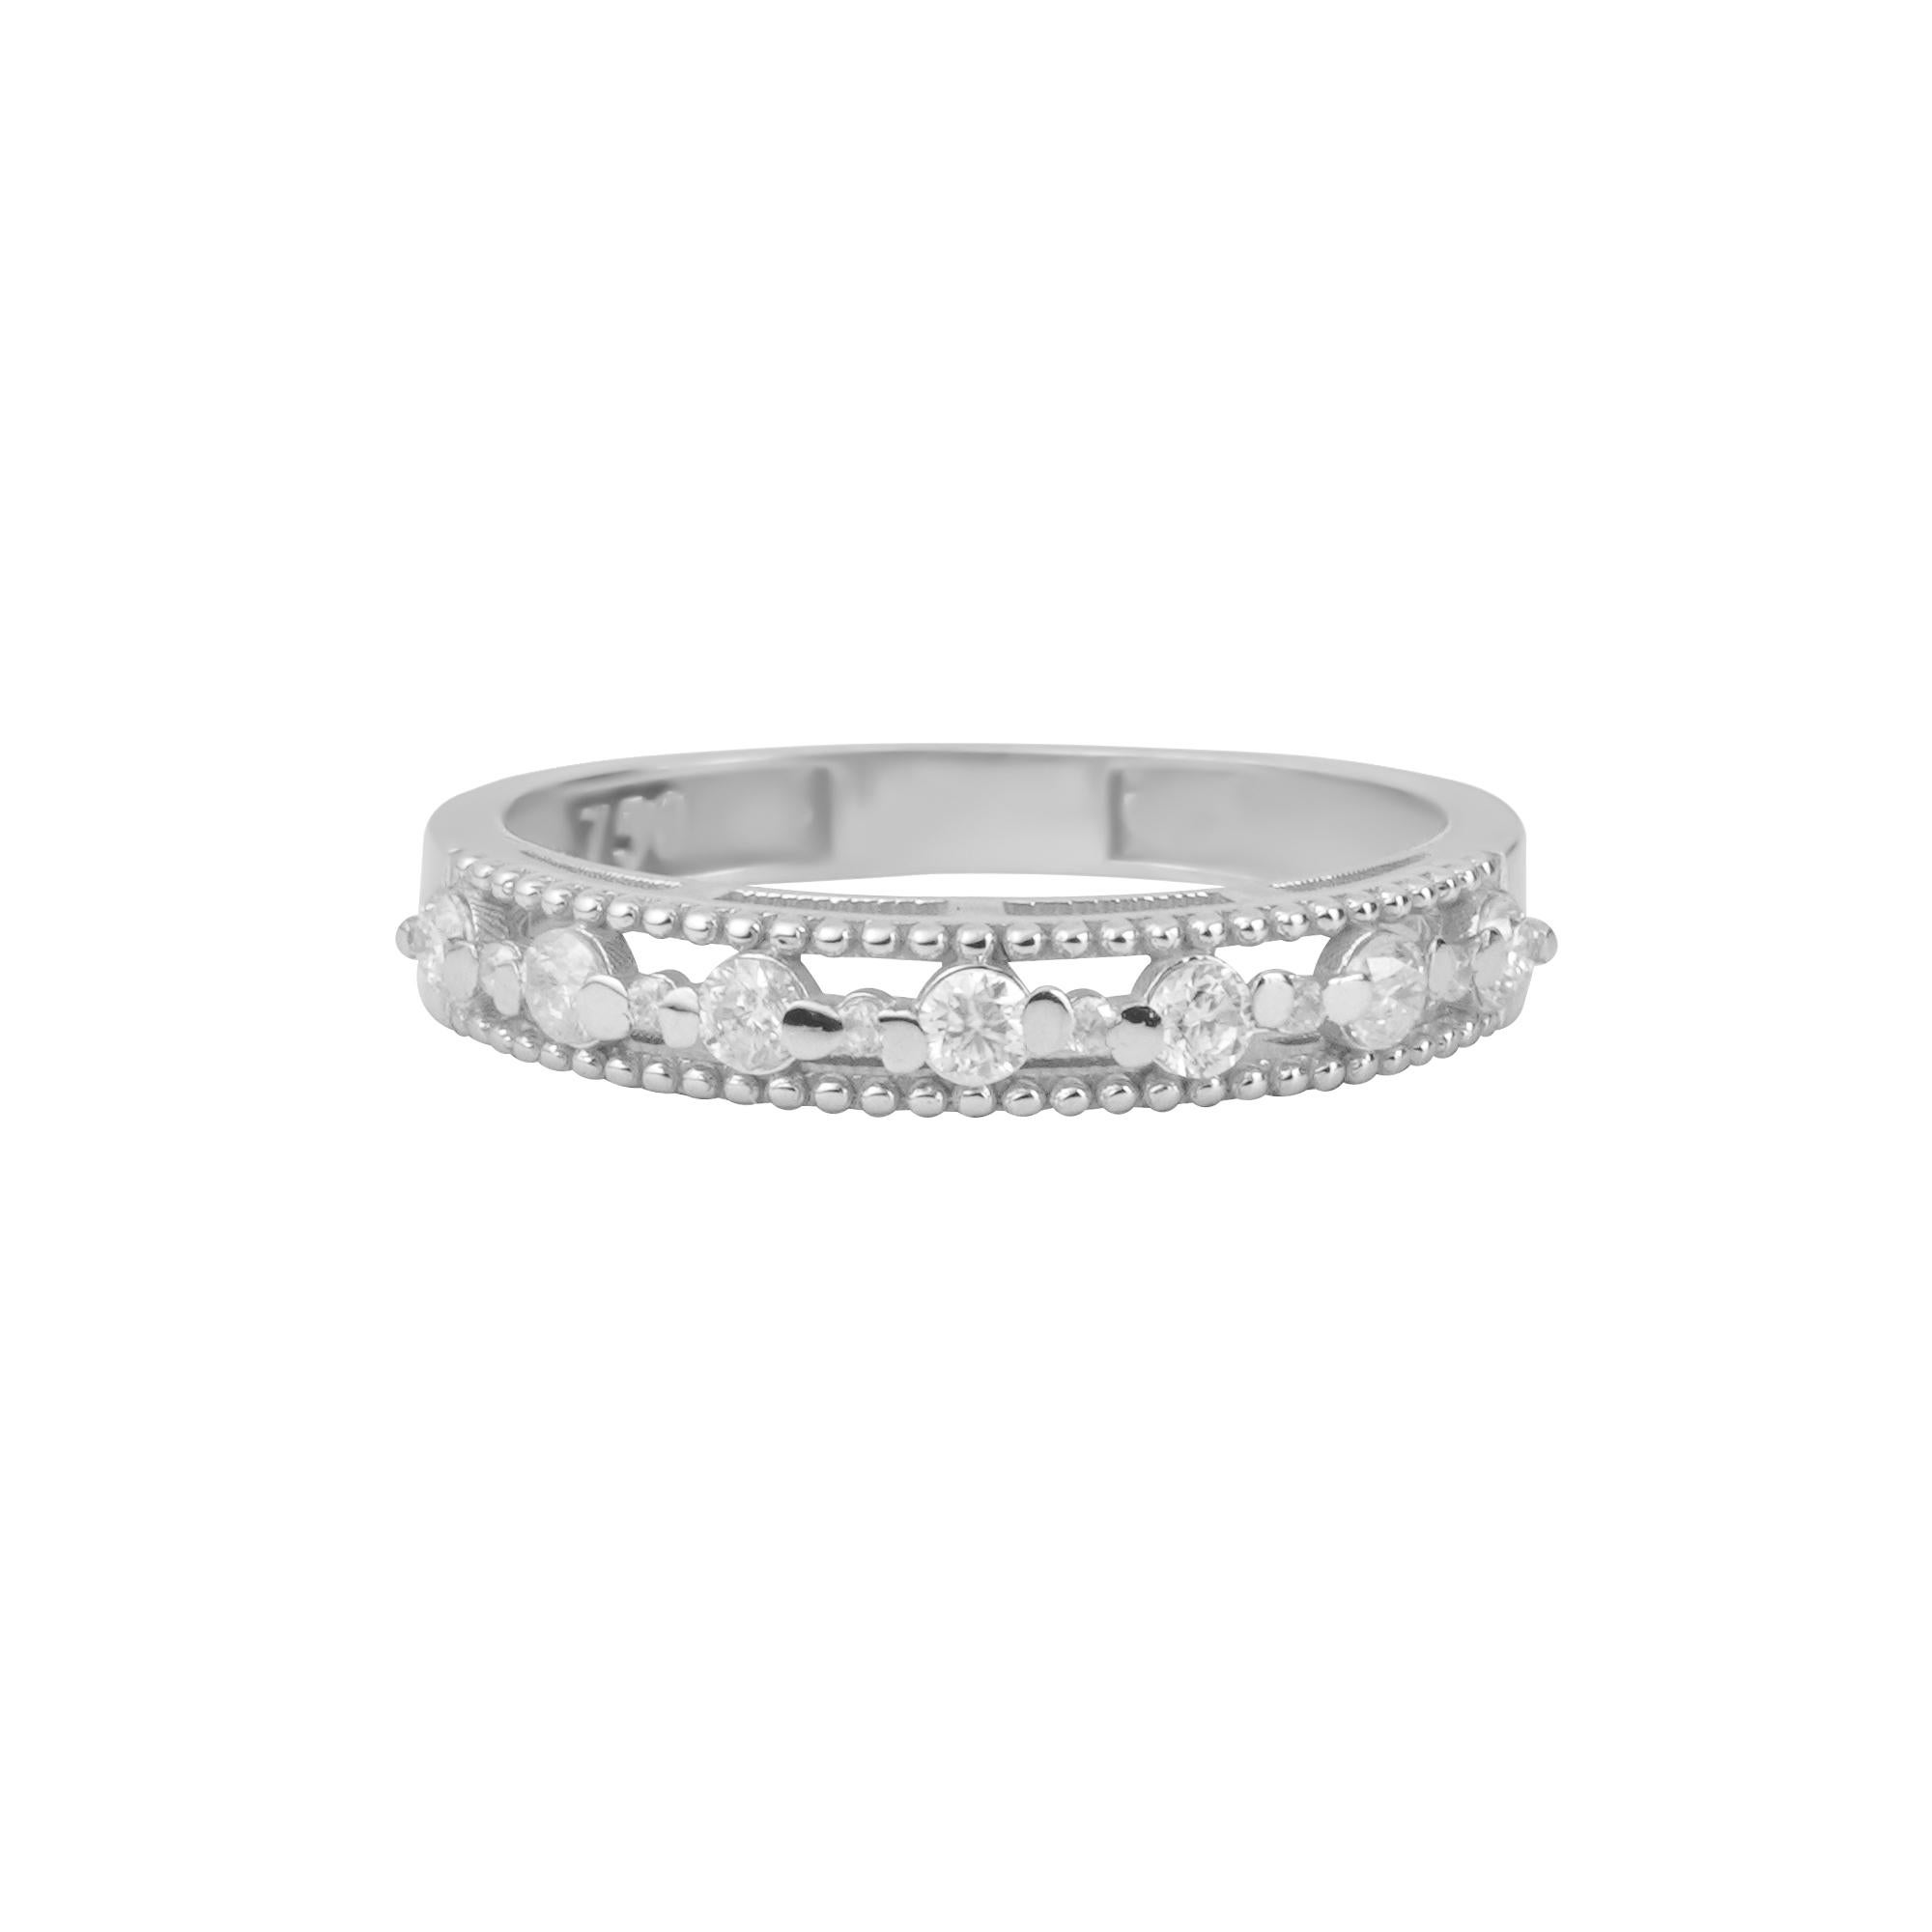 PRODUCT DETAILS:
18k Solid Gold
Stones:
Brilliant cut Moissanite 0.28 c.t (approx)
If you're looking for a ring that sparkles like the night sky, you'll love the Star Night Moissanite Band from Aye Jewelry. This beautiful band features a brilliant